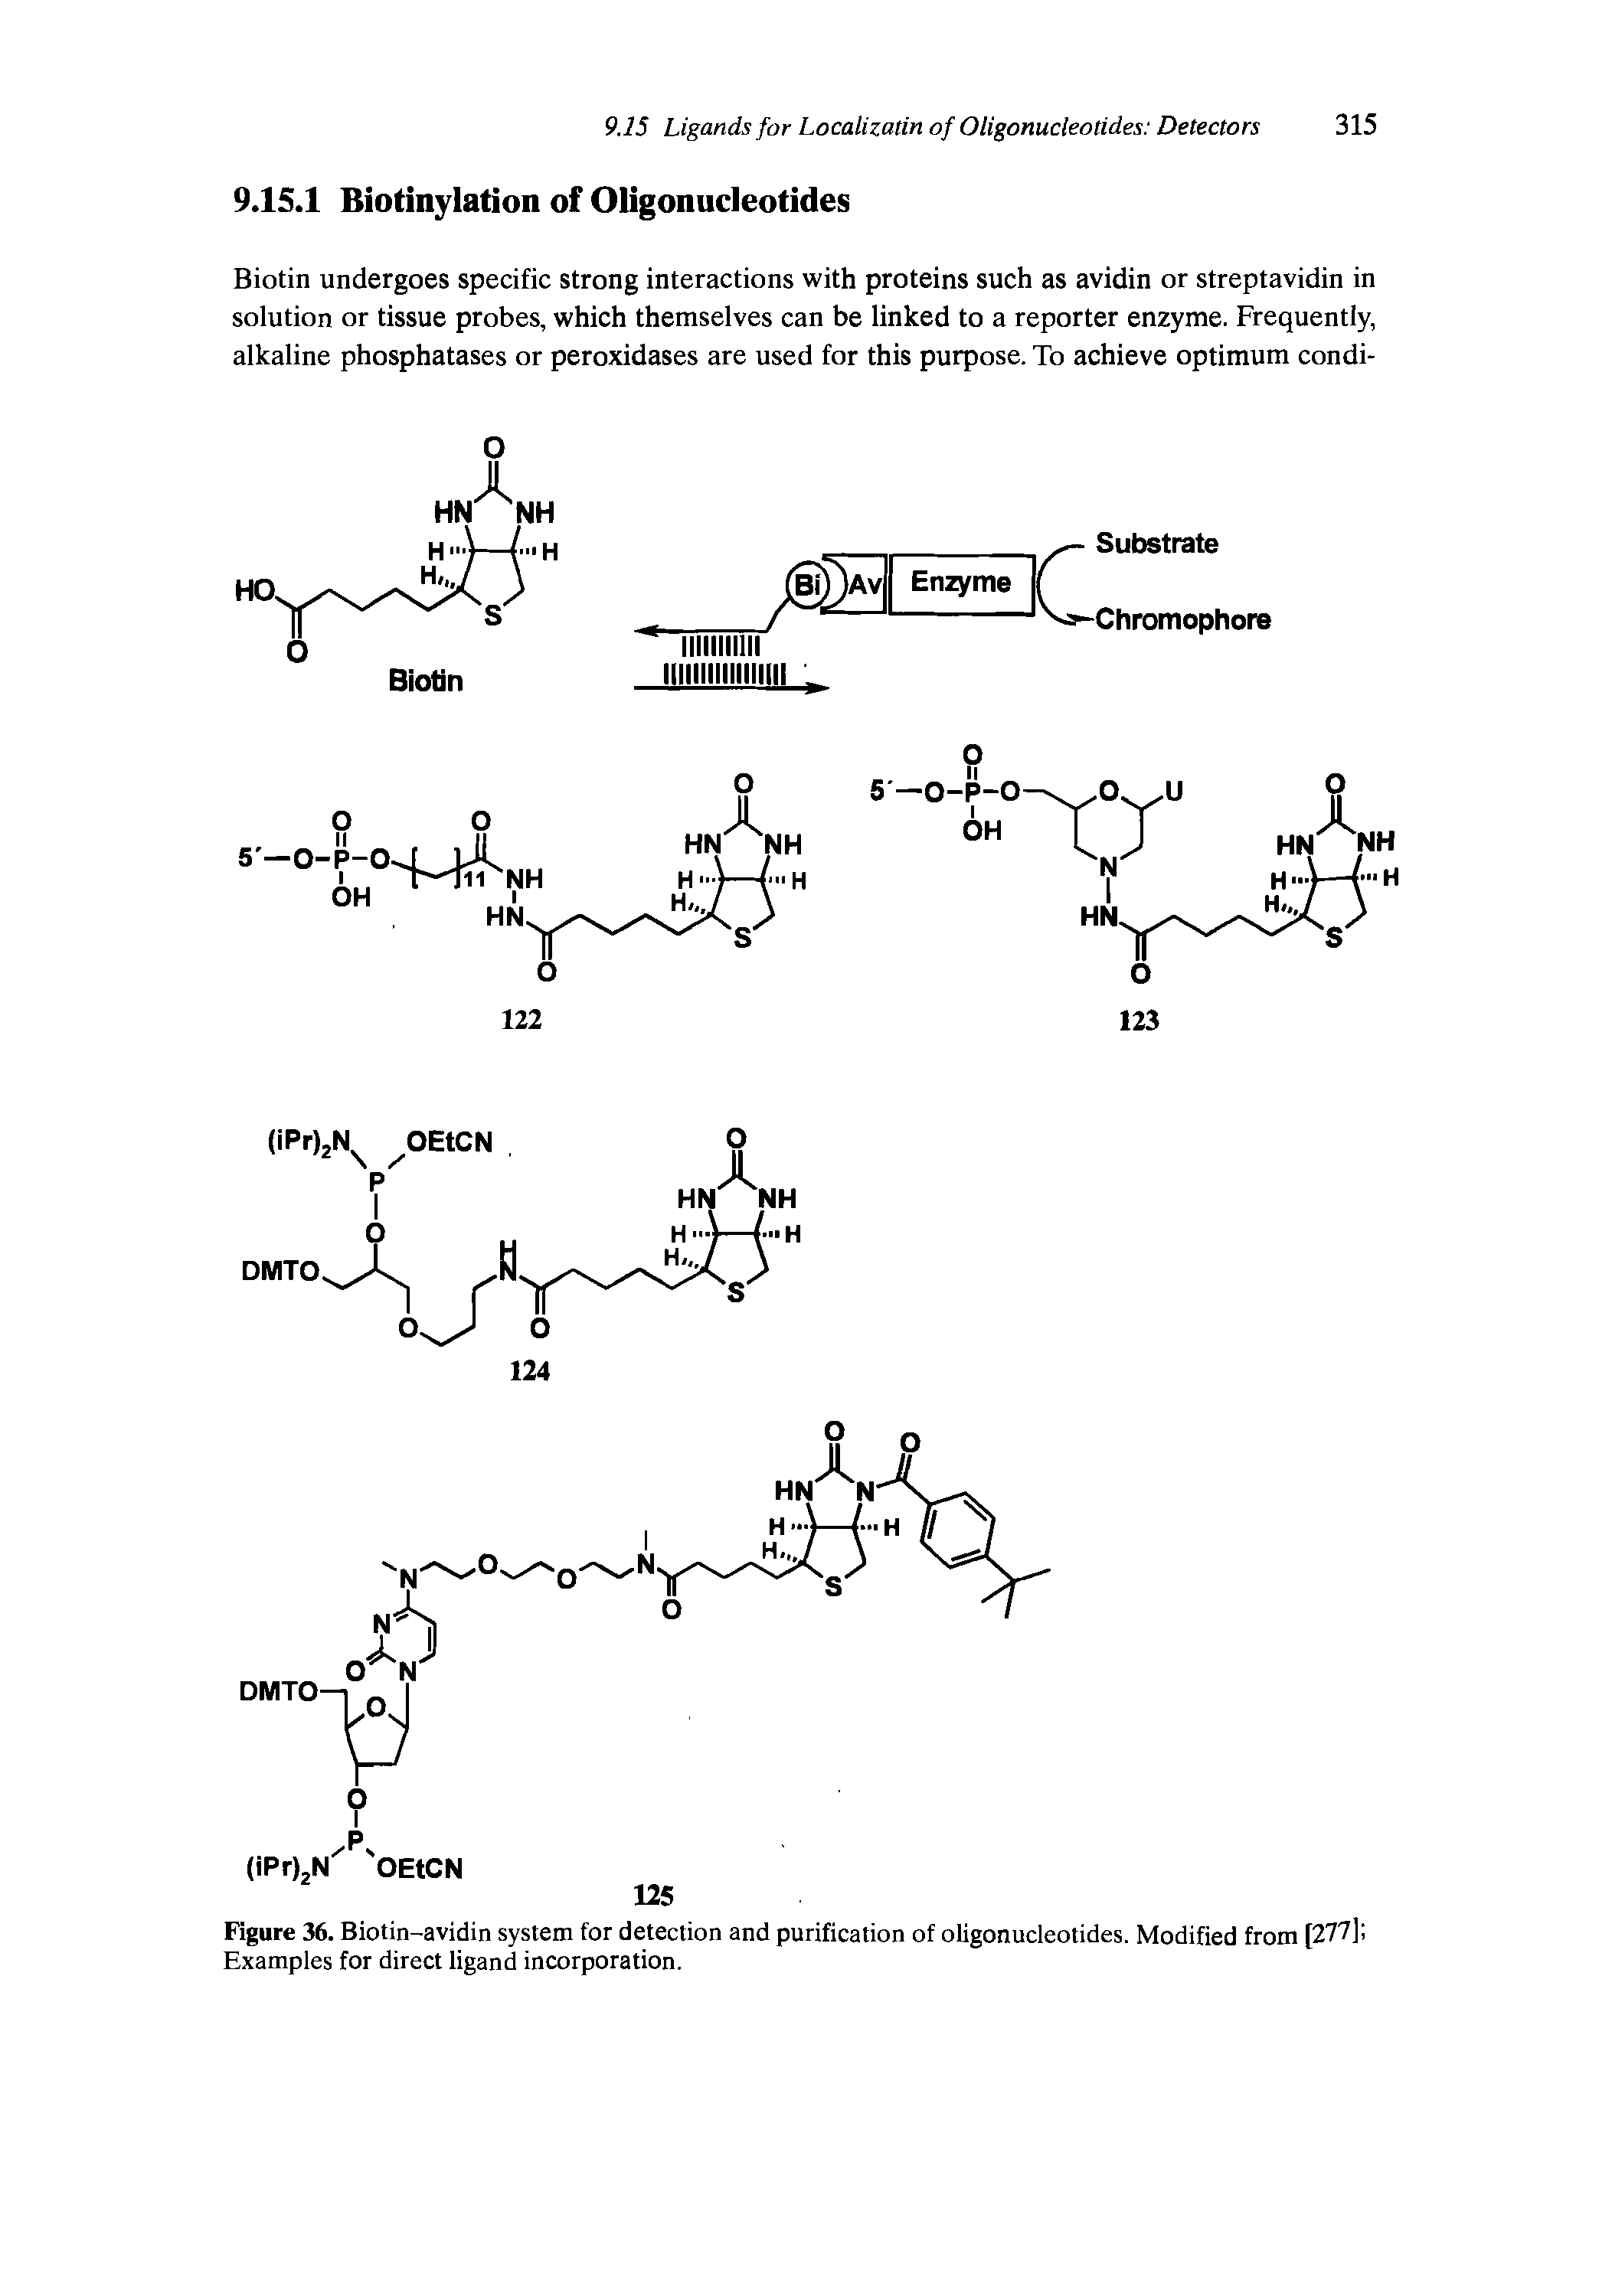 Figure 36. Biotin-avidin system for detection and purification of oligonucleotides. Modified from [277] Examples for direct ligand incorporation.